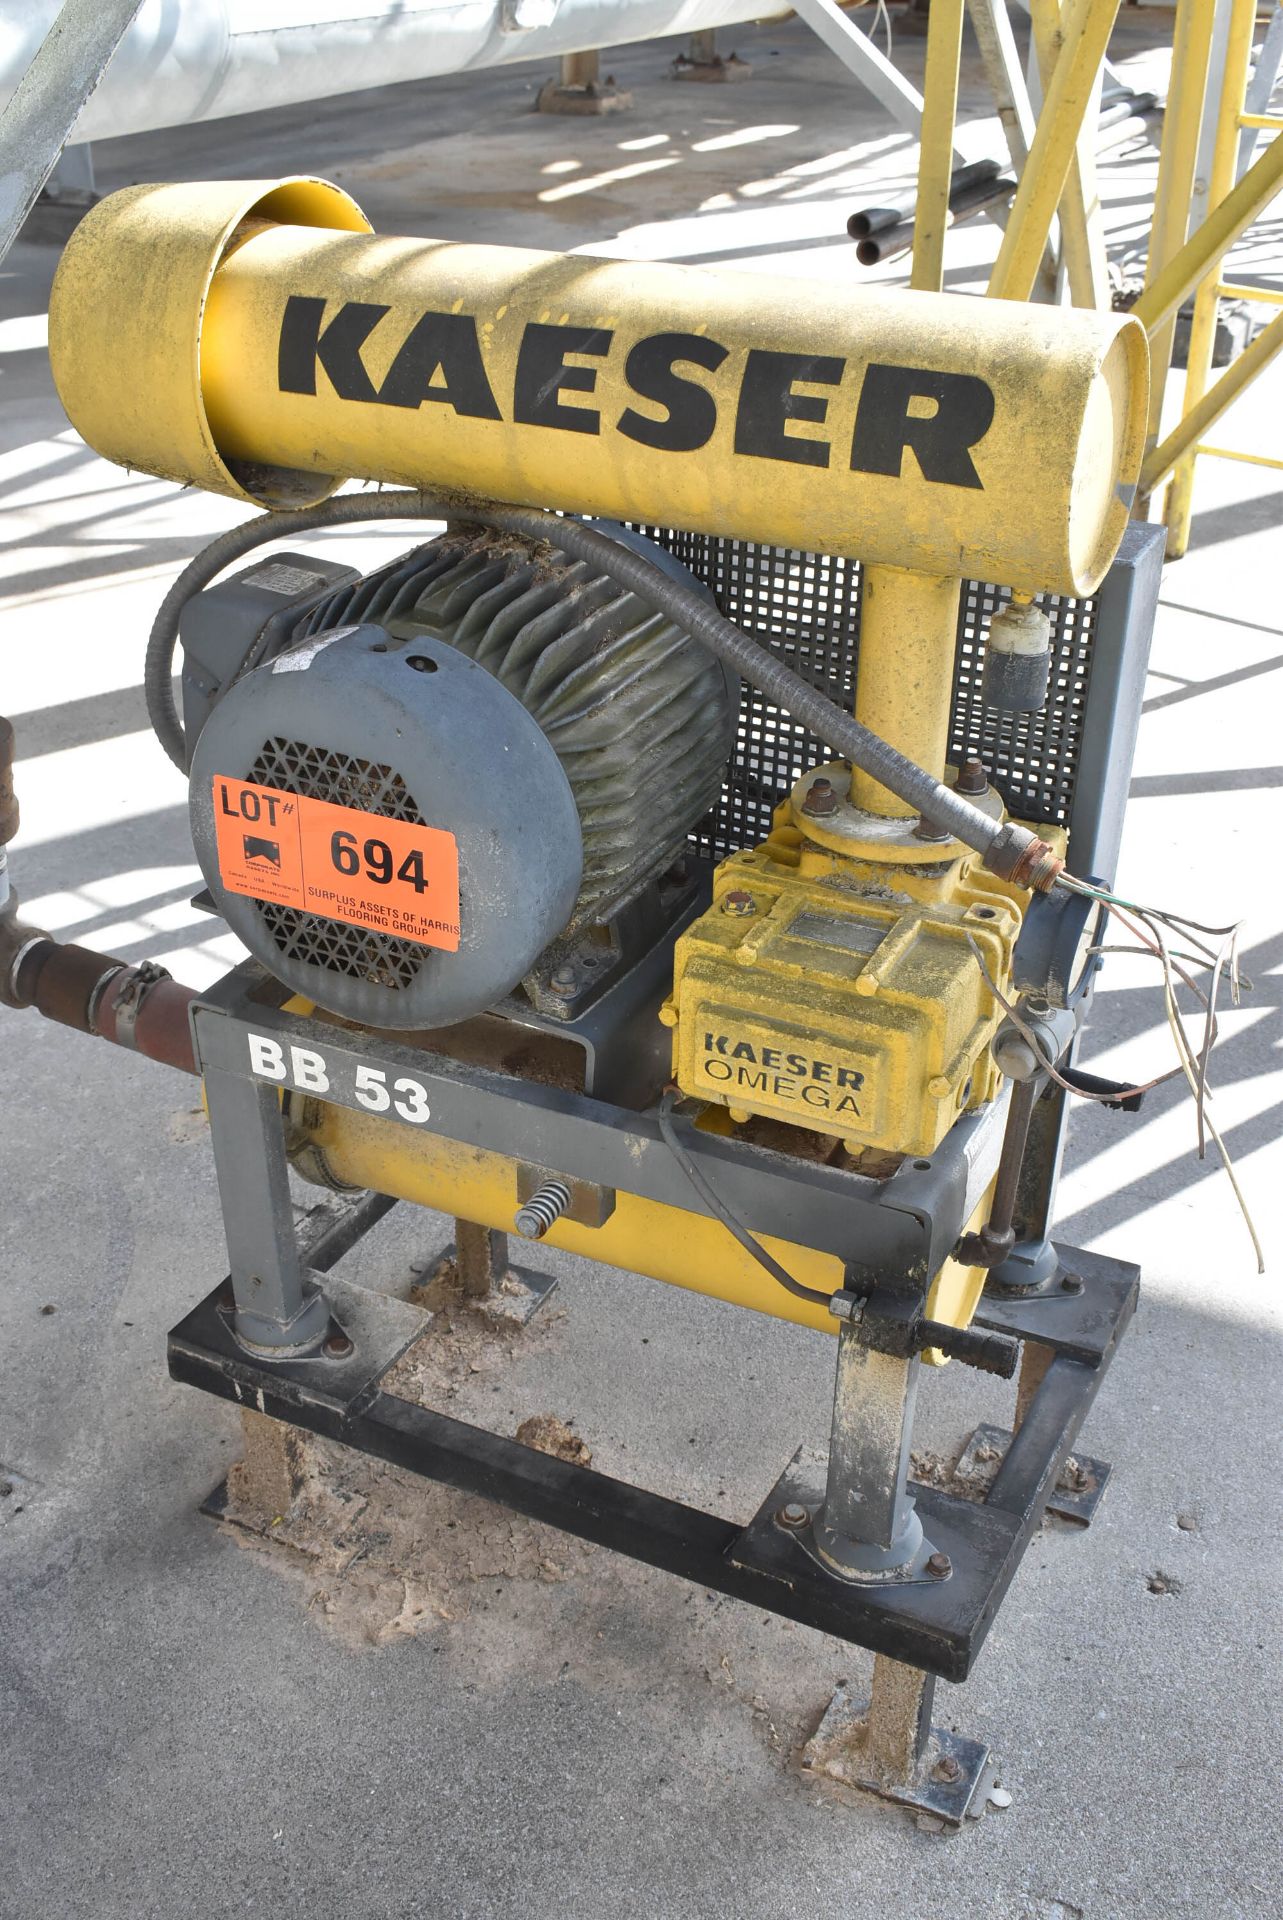 KAESER OMEGA 21 BLOWER, S/N: 219/9067 (CI) [RIGGING FEE FOR LOT #694 - $300 USD PLUS APPLICABLE